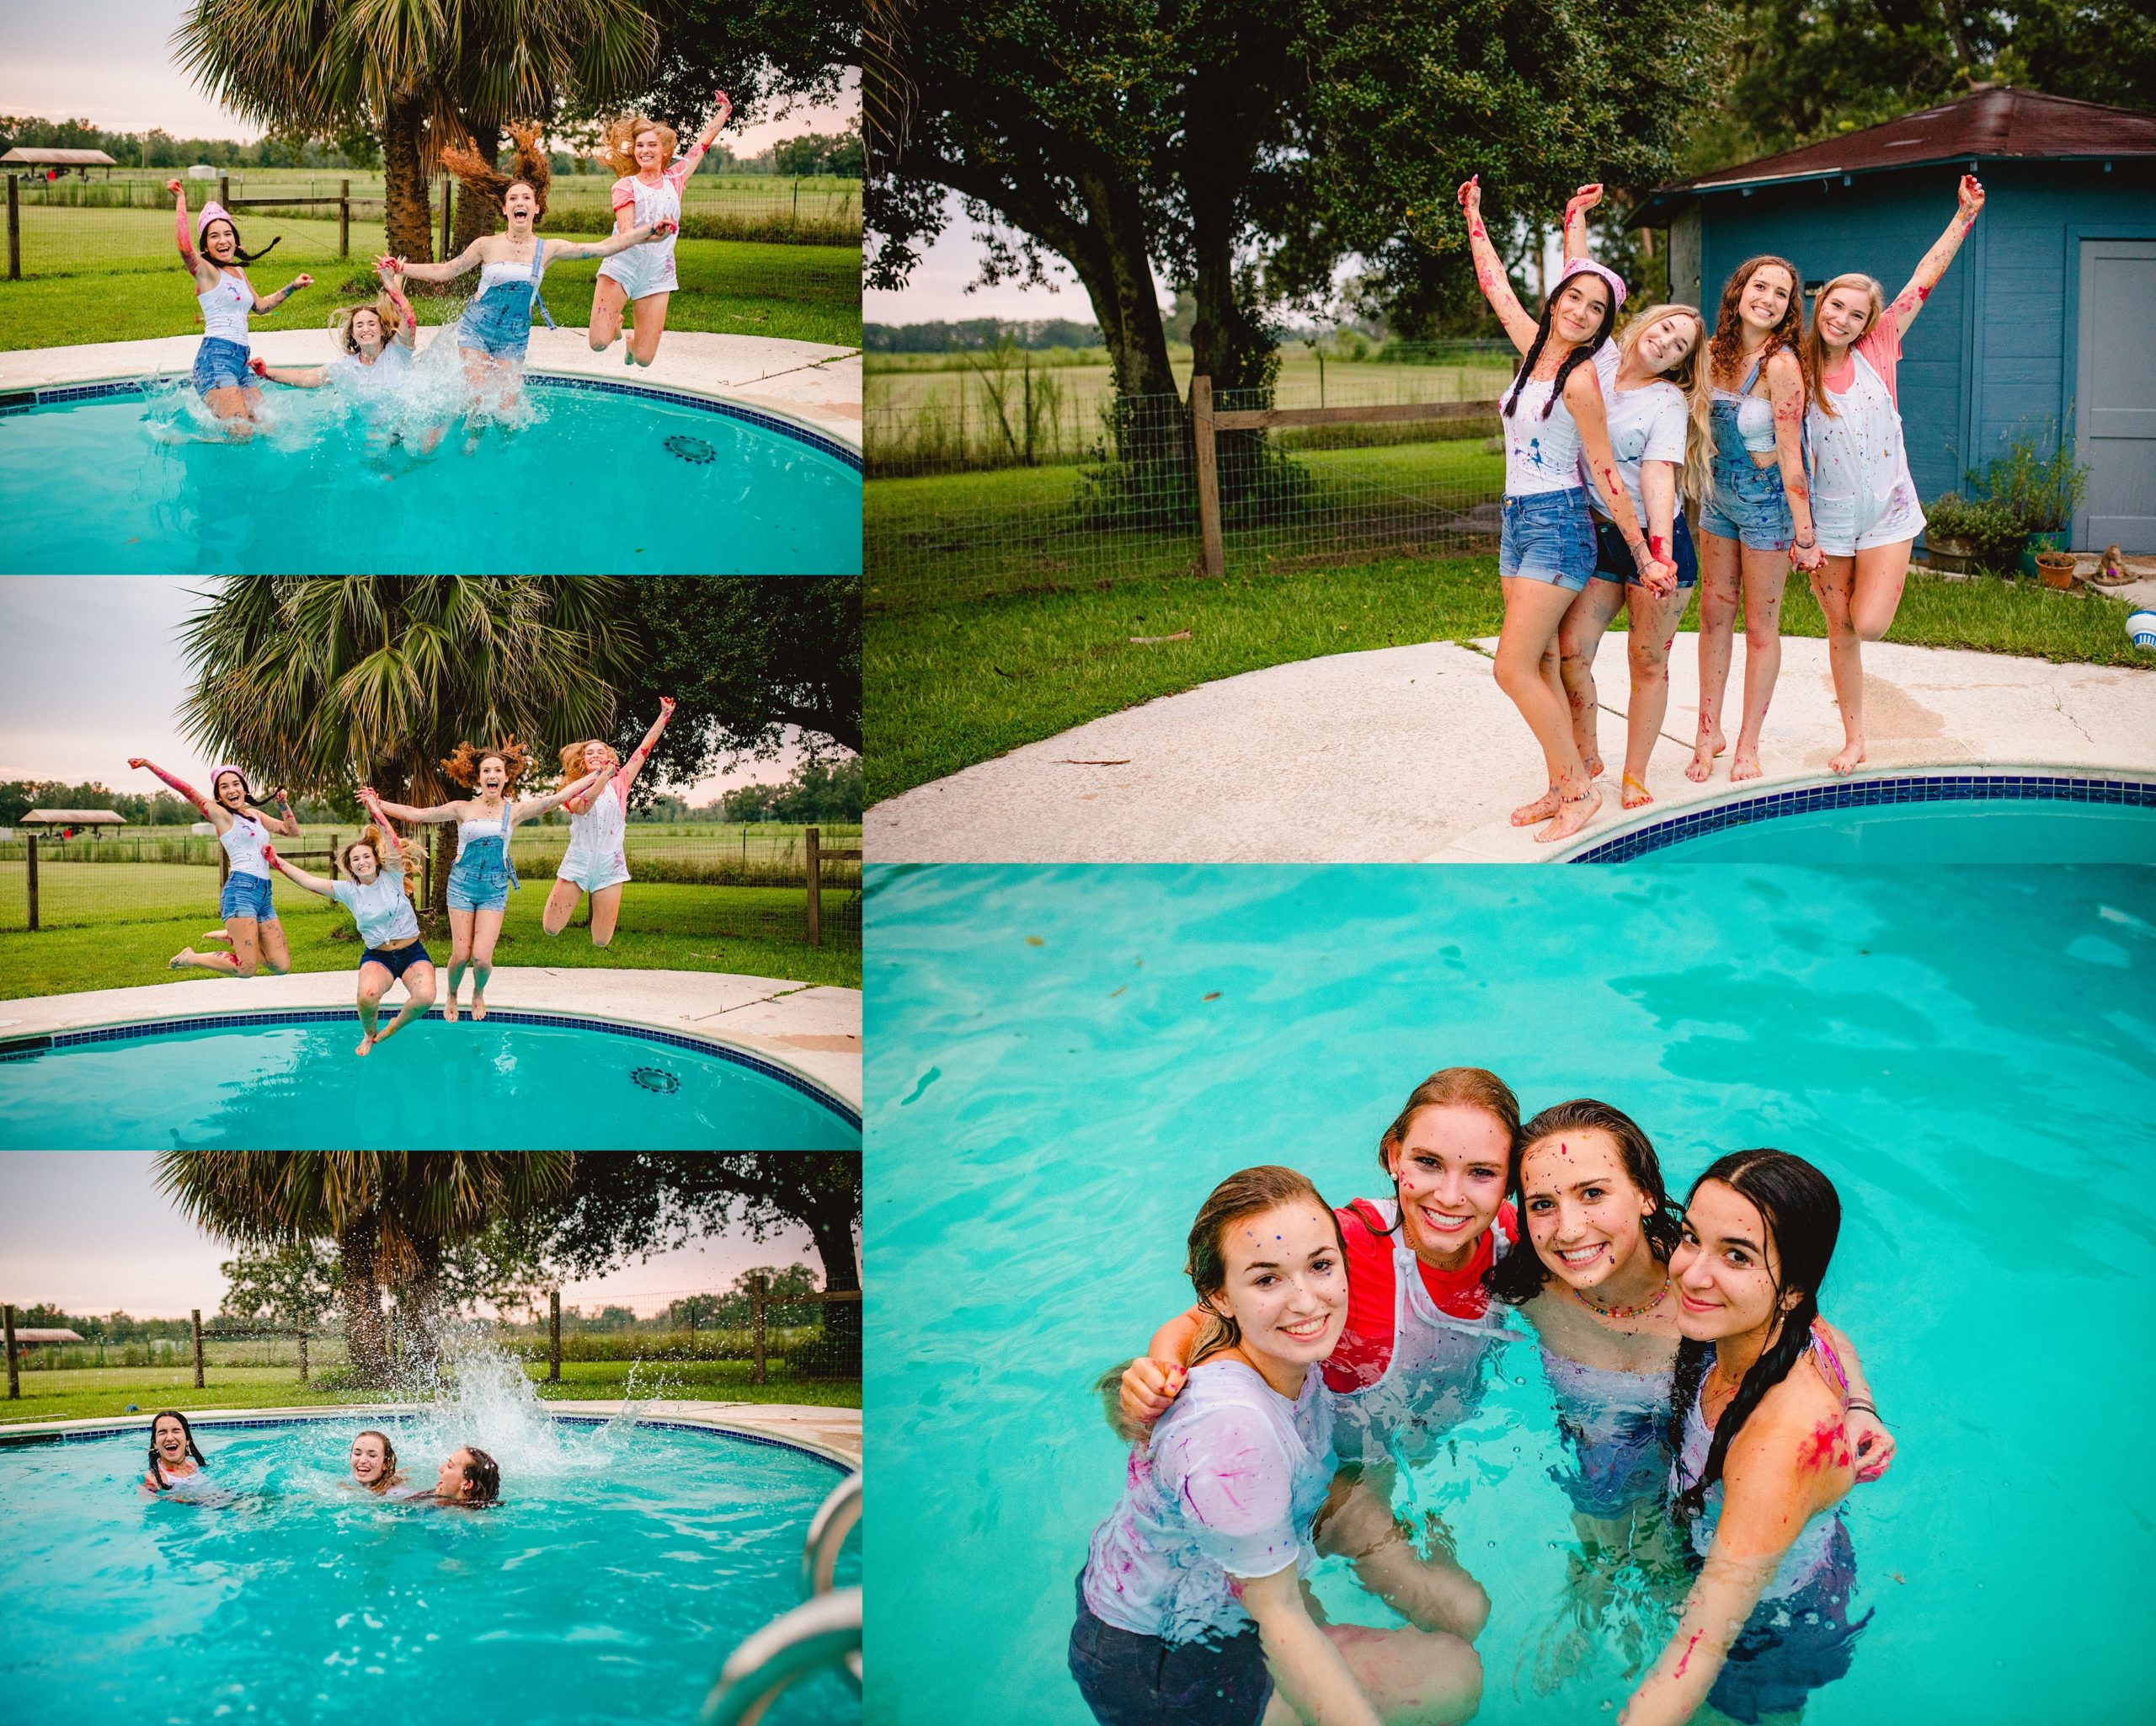 Senior model team jumps into a pool in Florida.